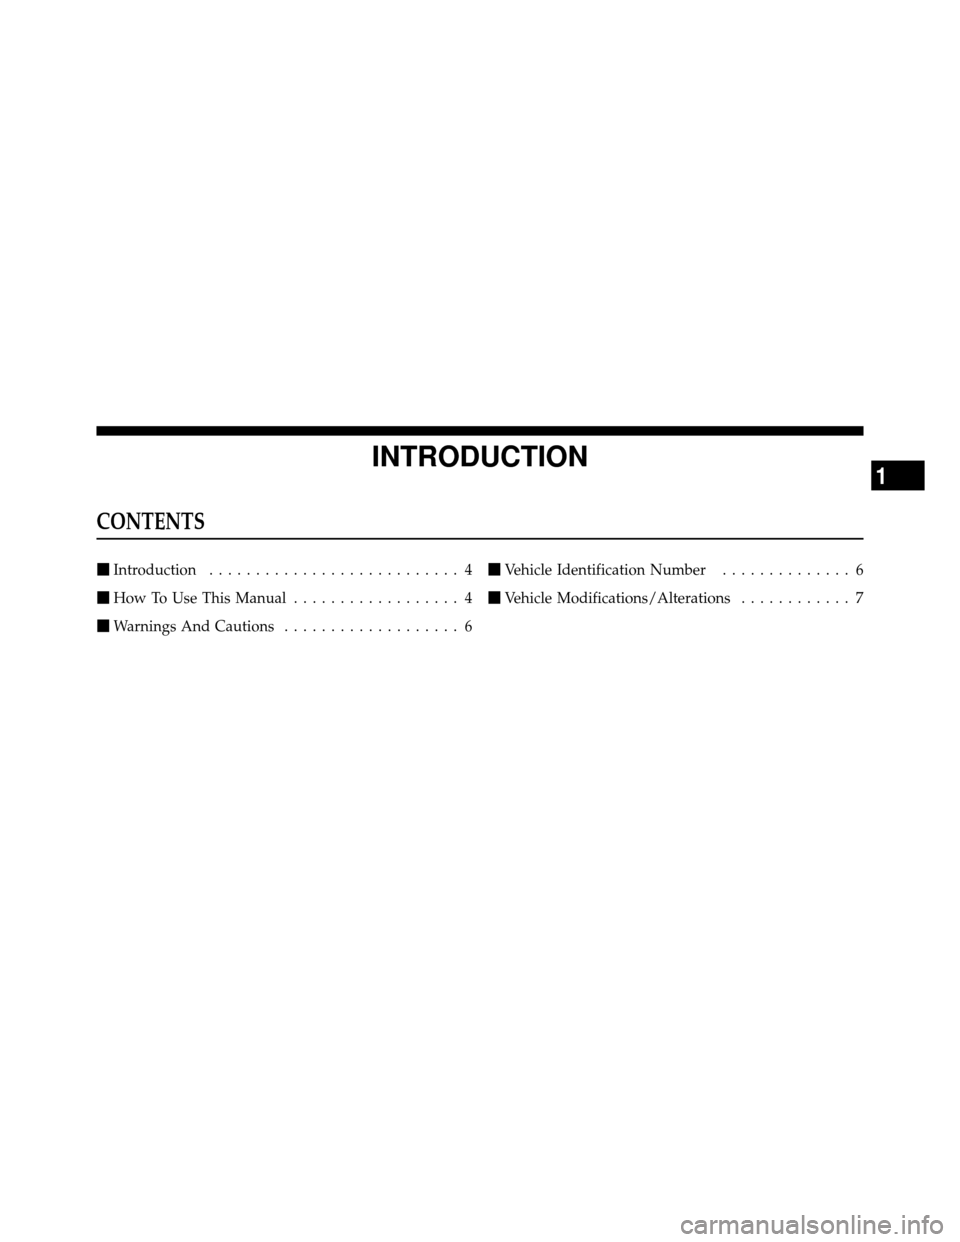 CHRYSLER 200 2012 1.G Owners Manual INTRODUCTION
CONTENTS
Introduction ........................... 4
 How To Use This Manual .................. 4
 Warnings And Cautions ................... 6 
Vehicle Identification Number ..........